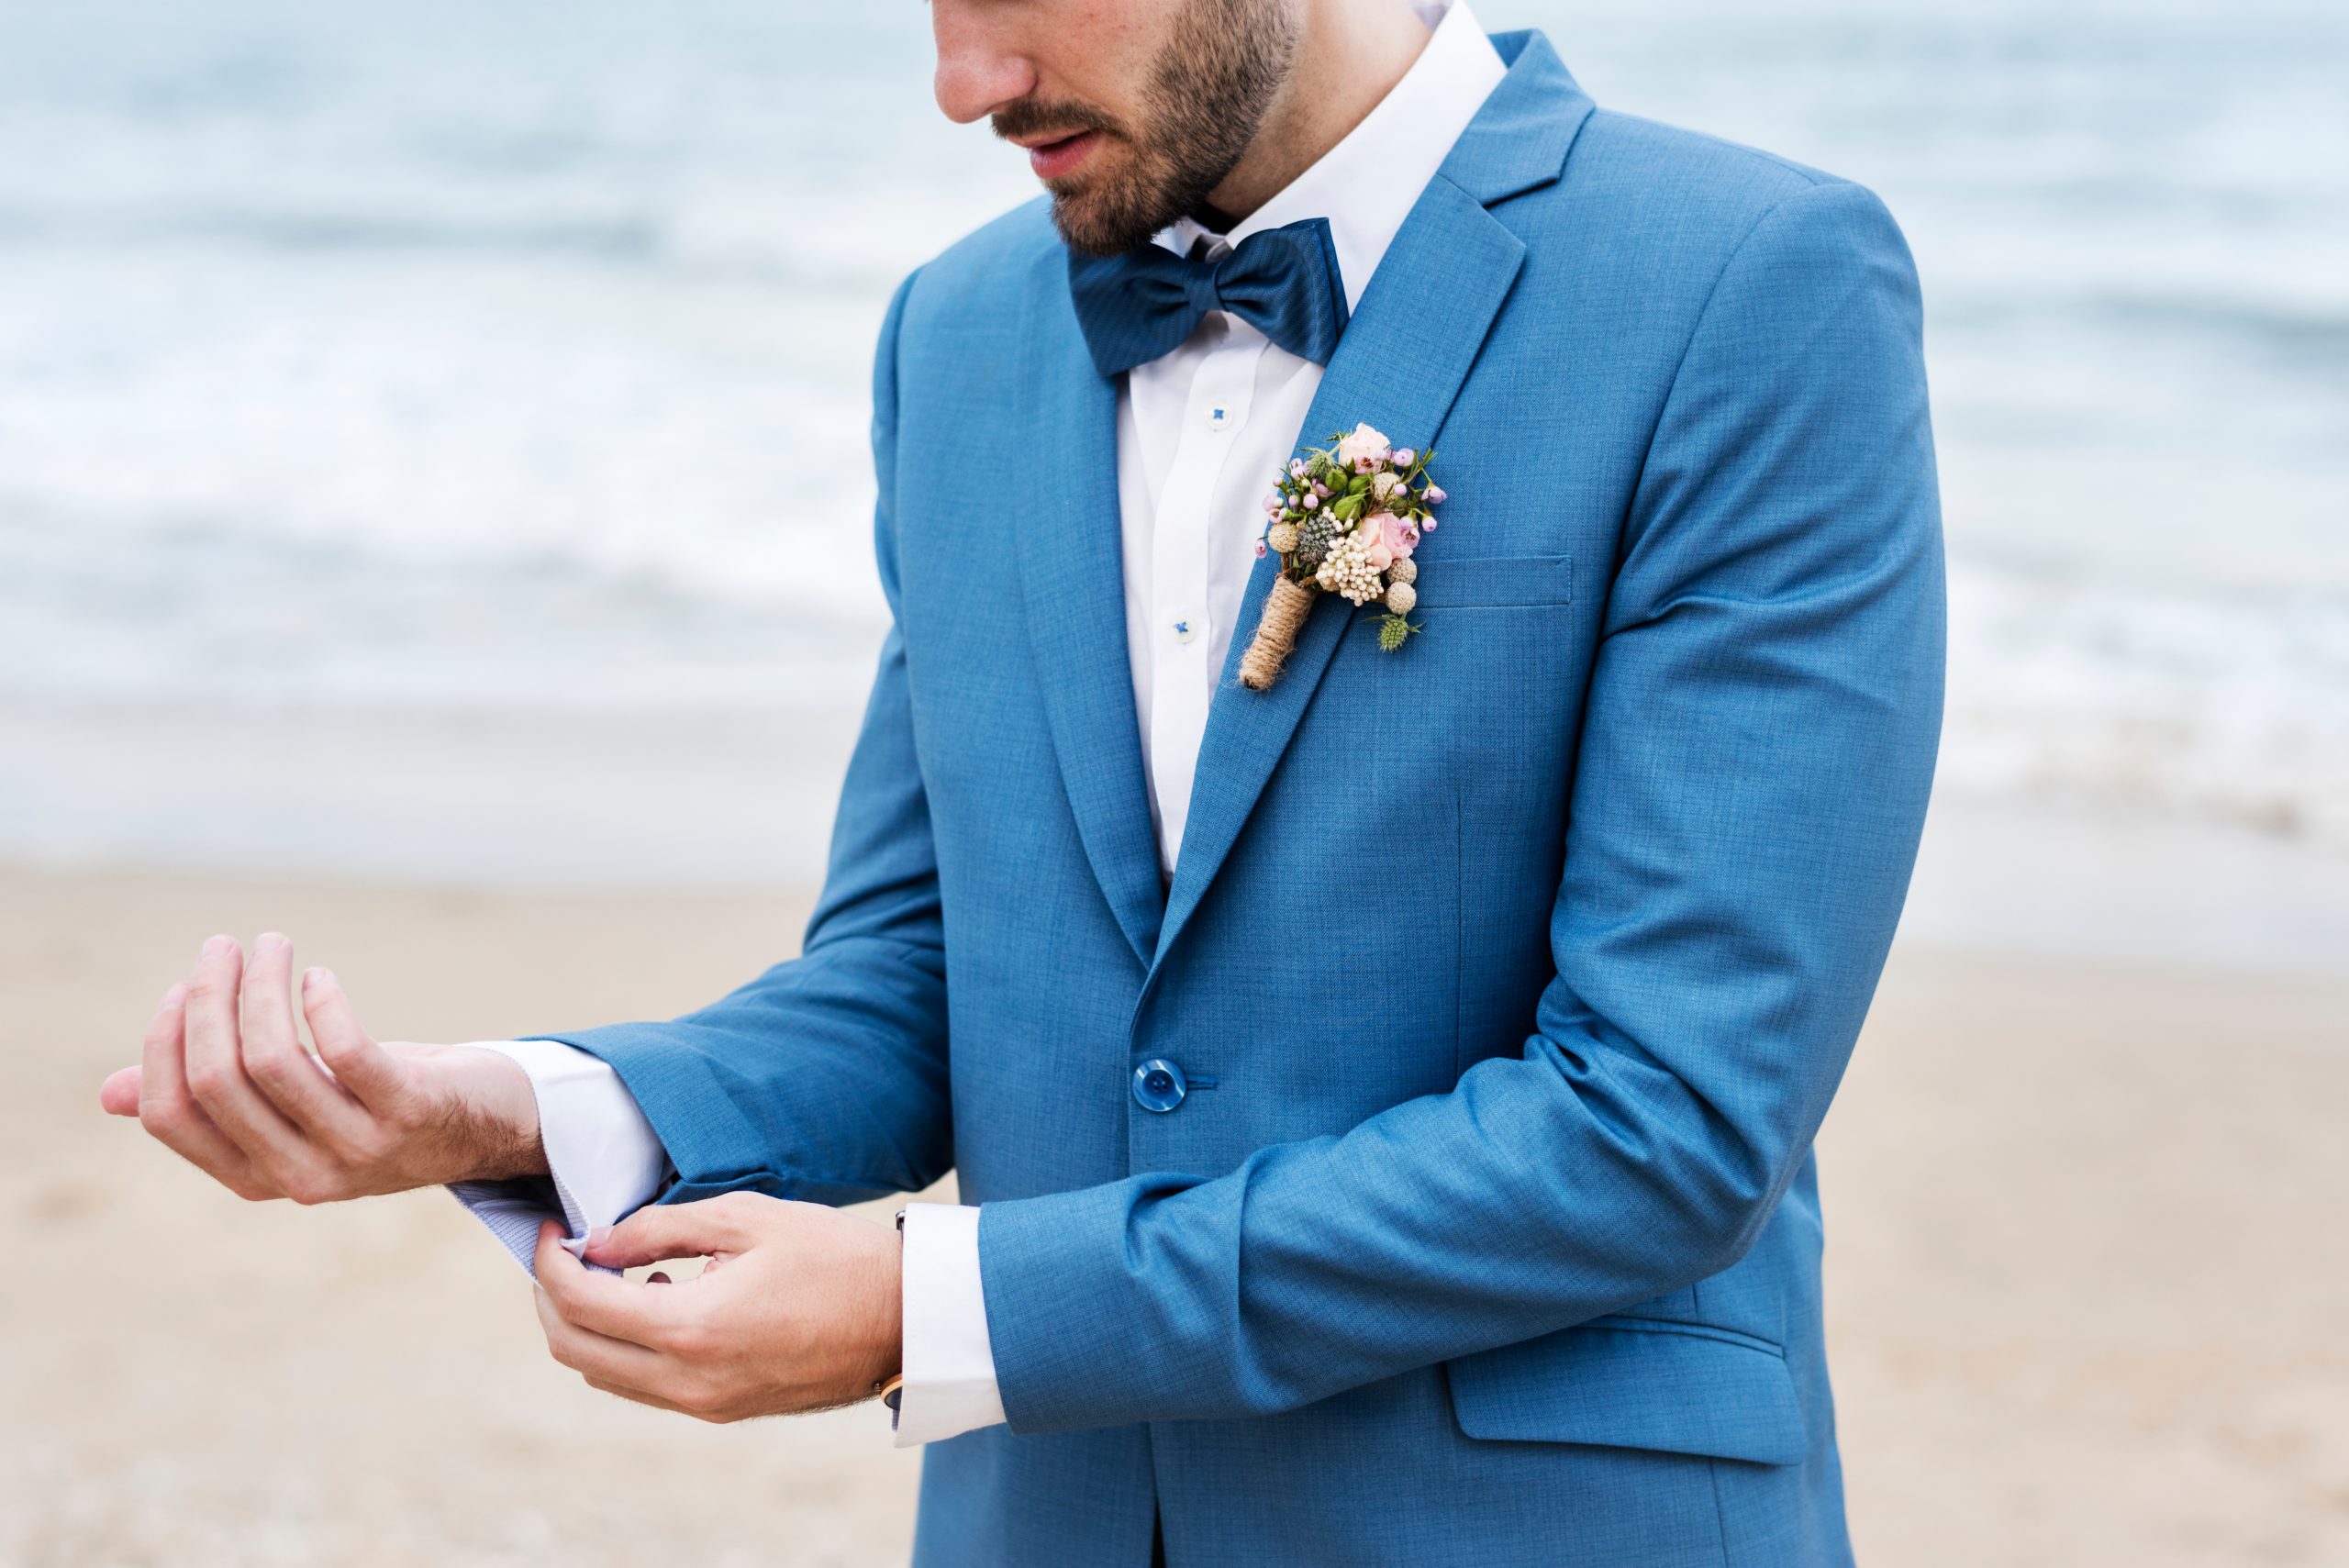 Wedding | Stitch-It & Co Custom Suits & Alterations in Nashville